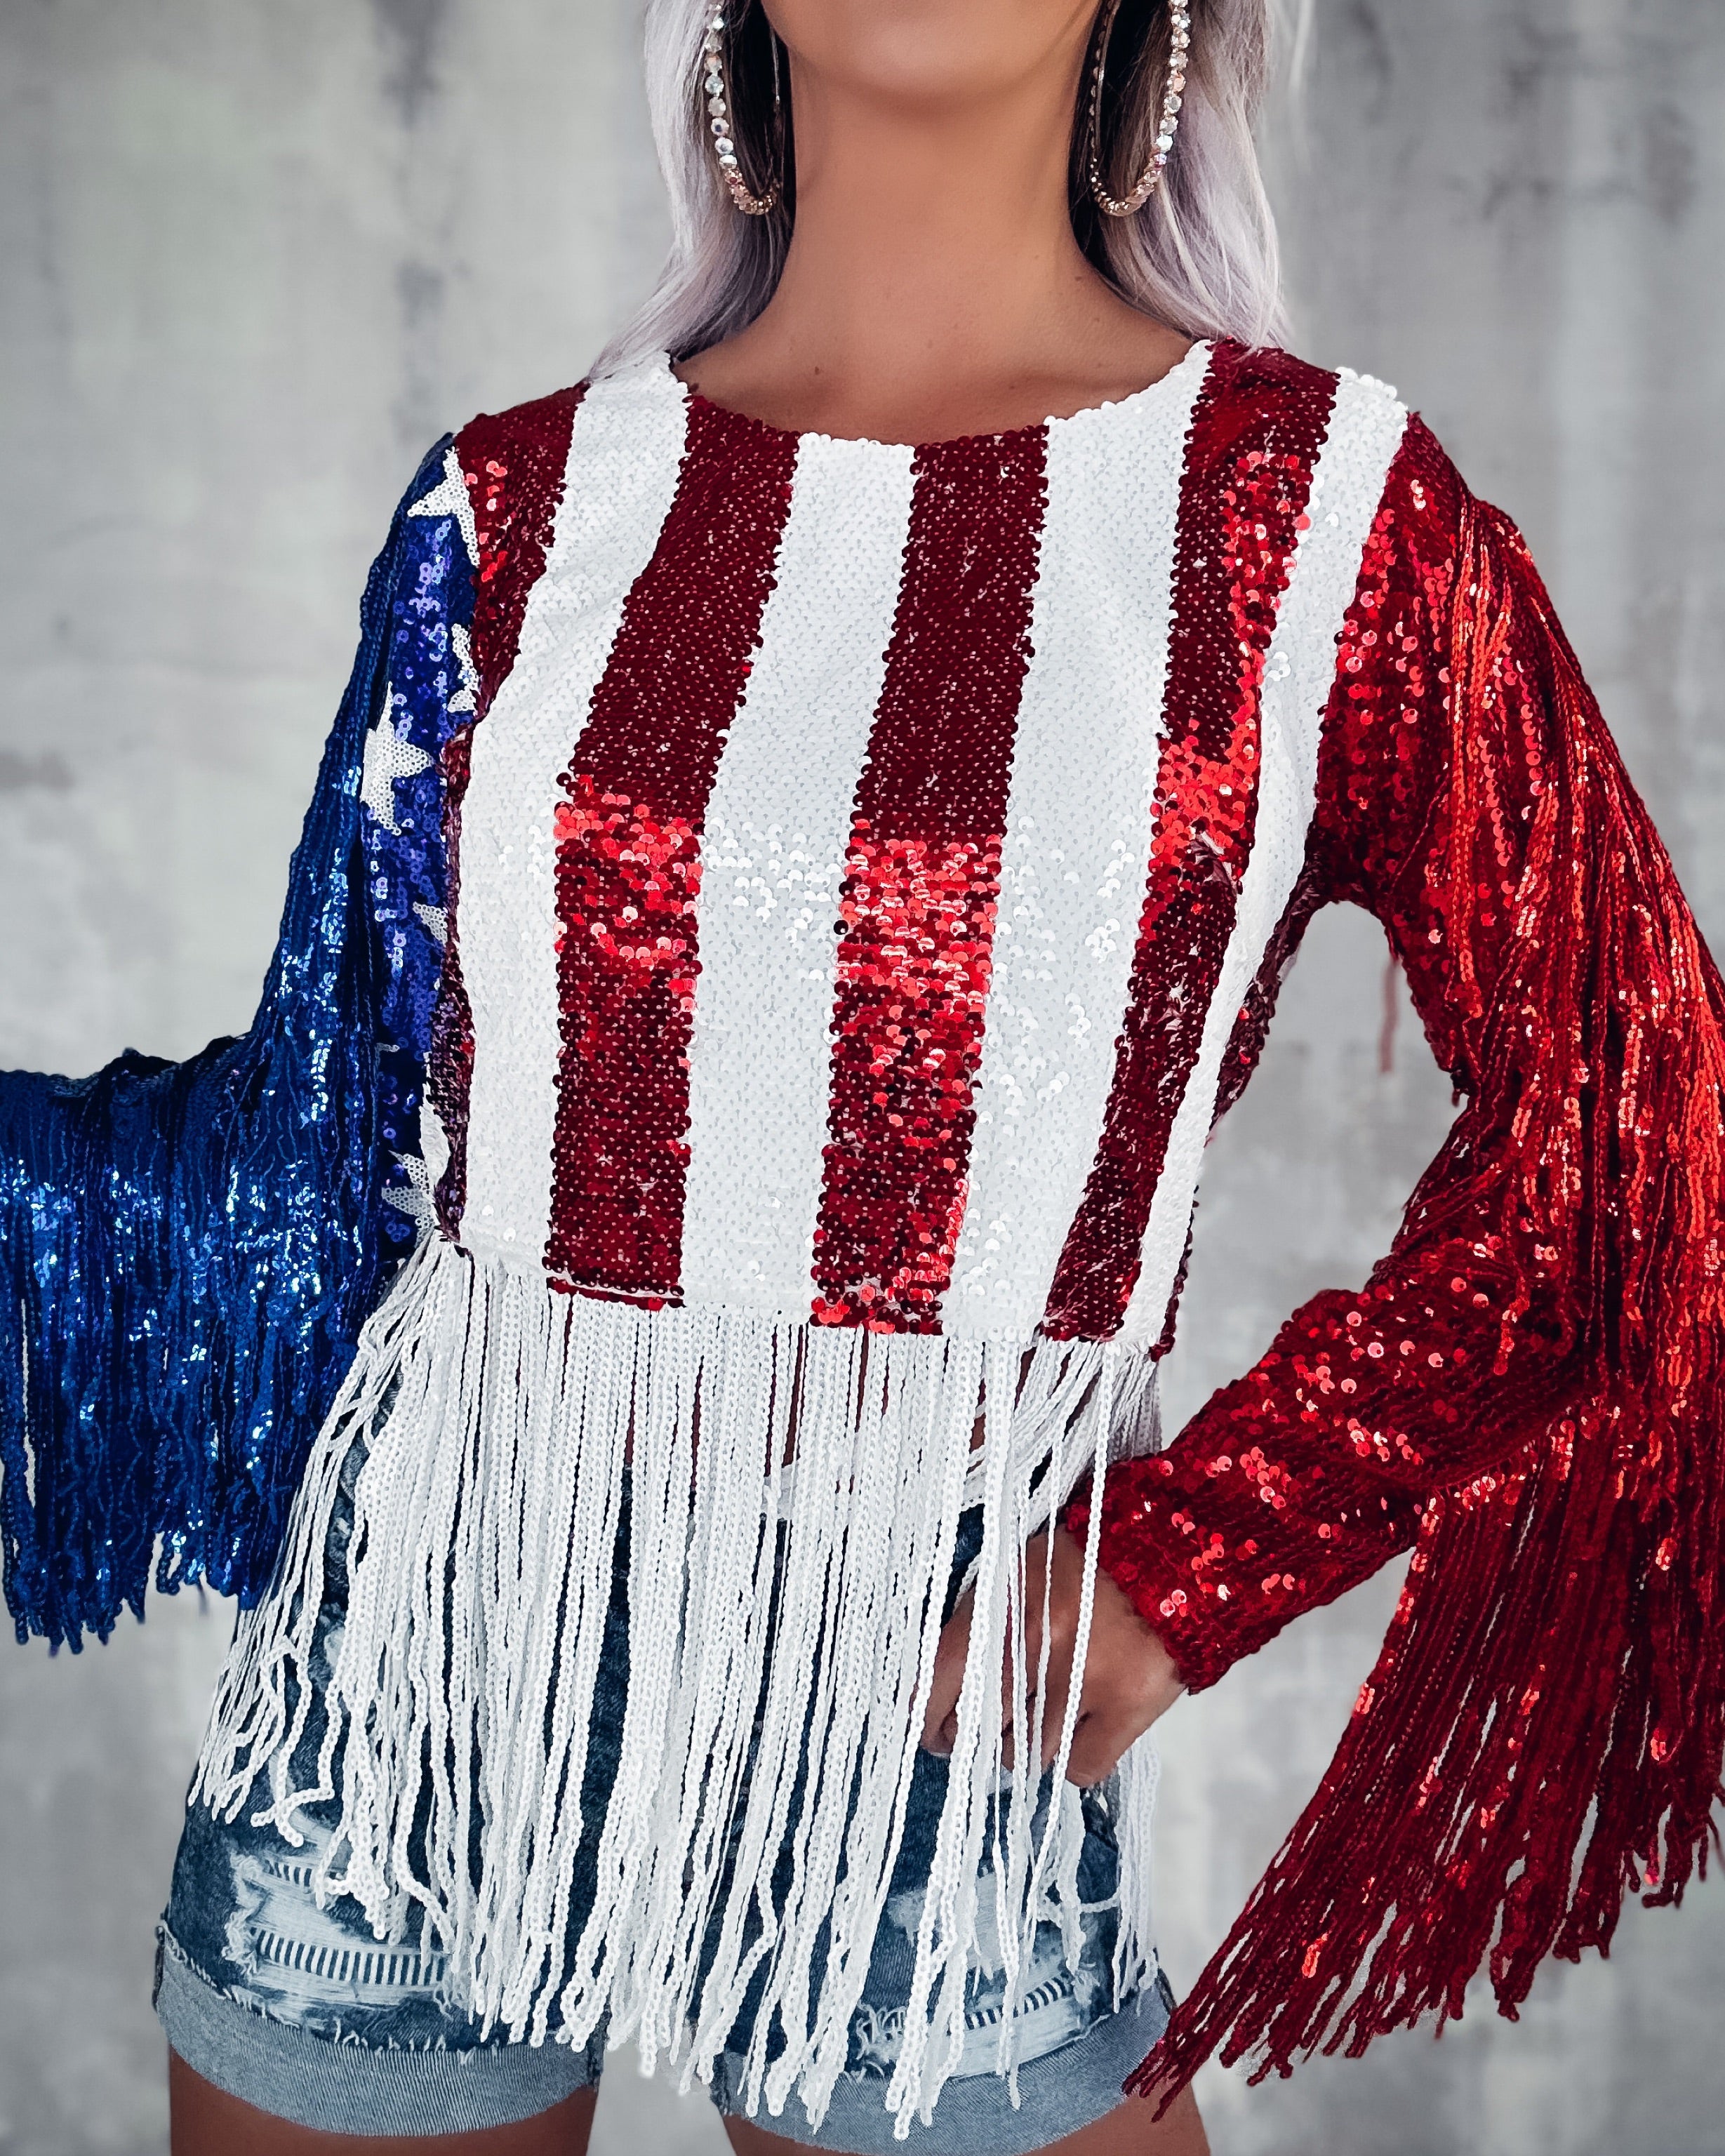 American Fringe Sequin Crop Top - Red/White/Blue